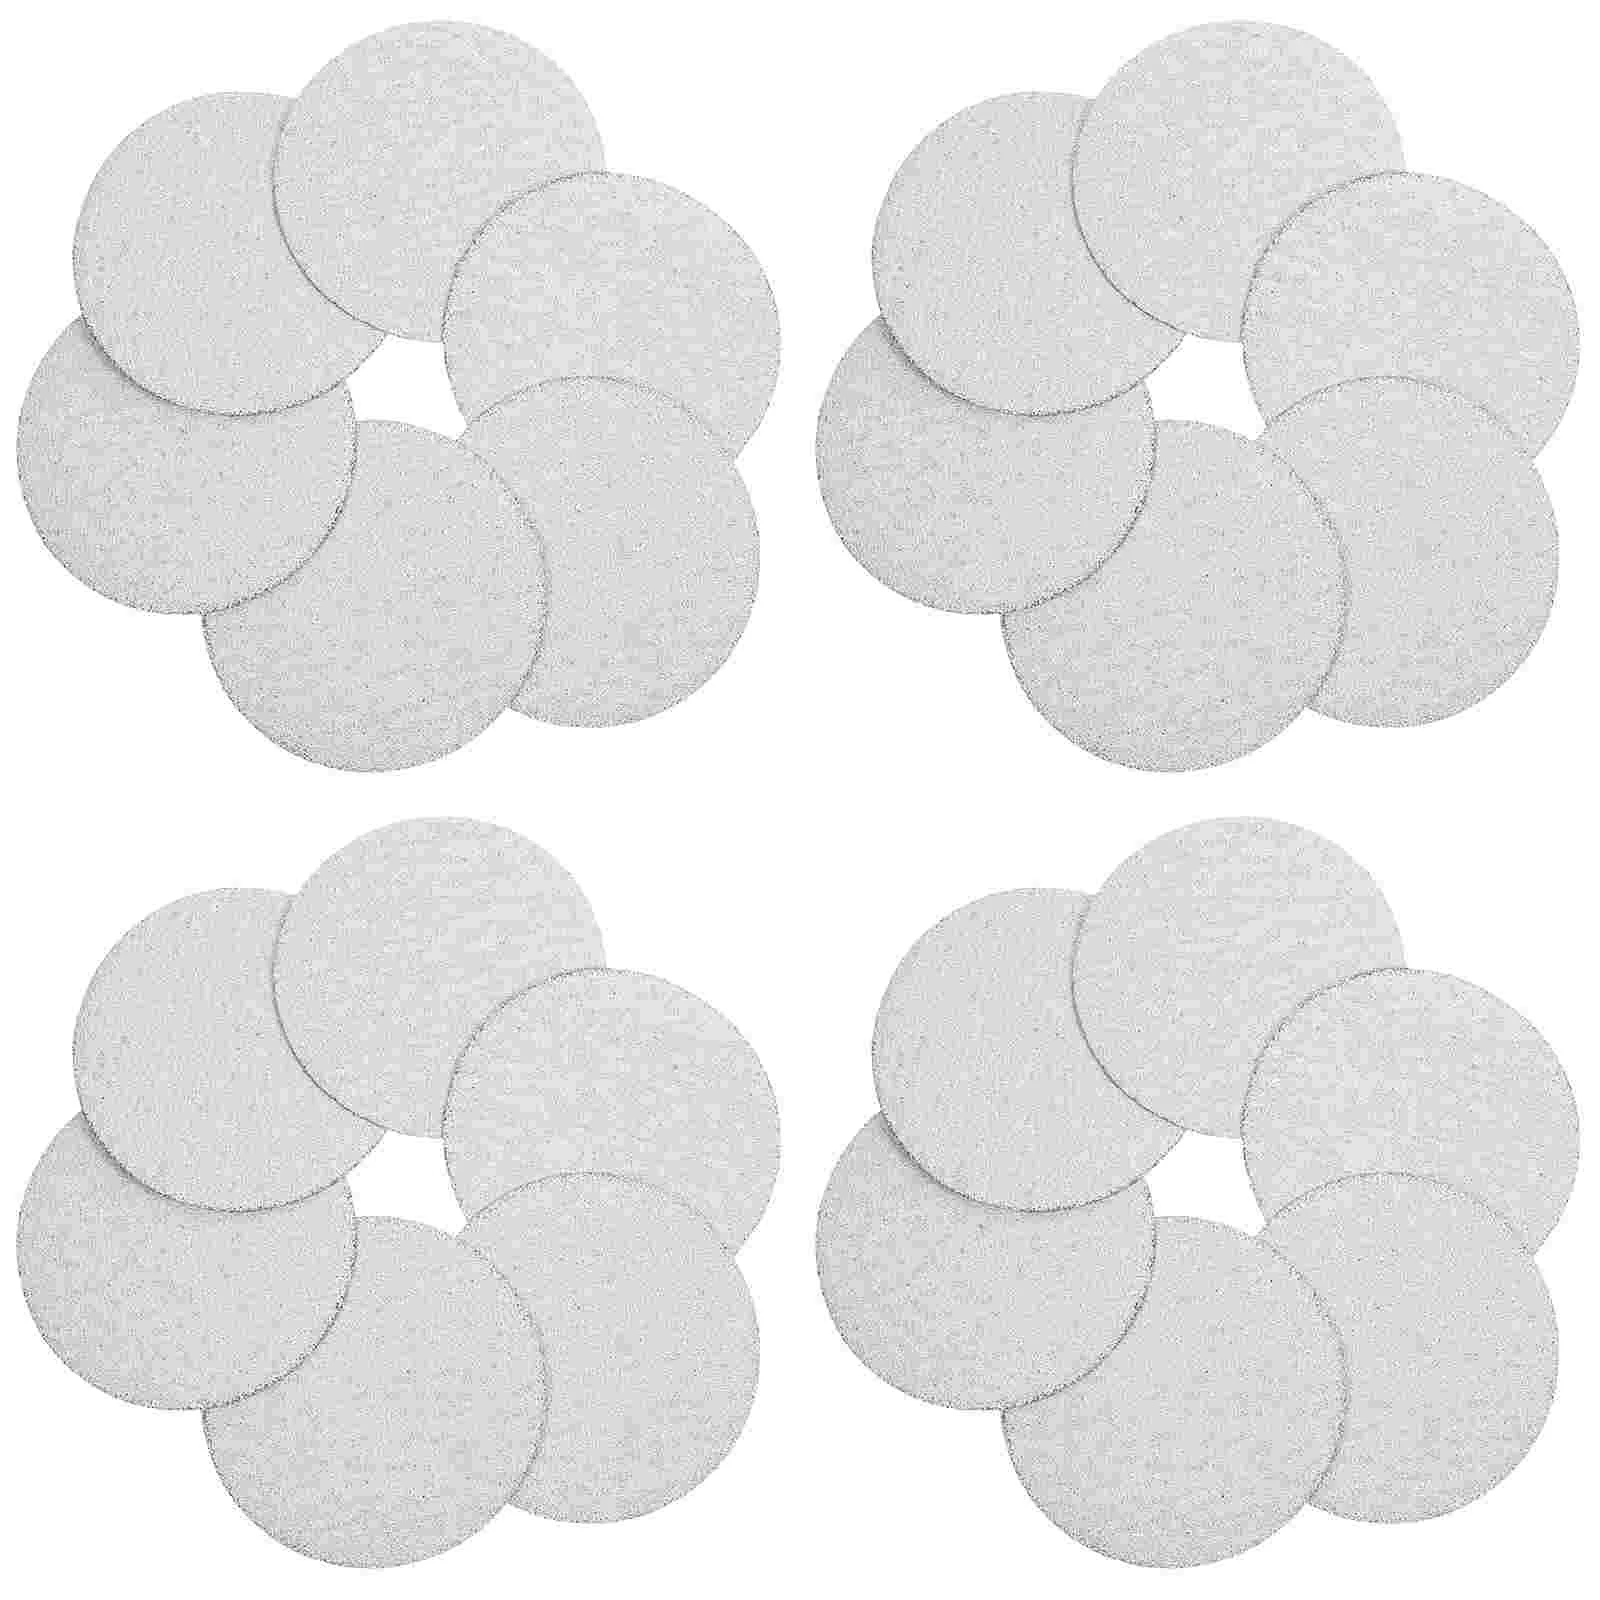 

Grinding Paper 4 Inch Sanding Disc Angle Grinder Sandpaper Drill Attachment Buffing Pad Die Accessories